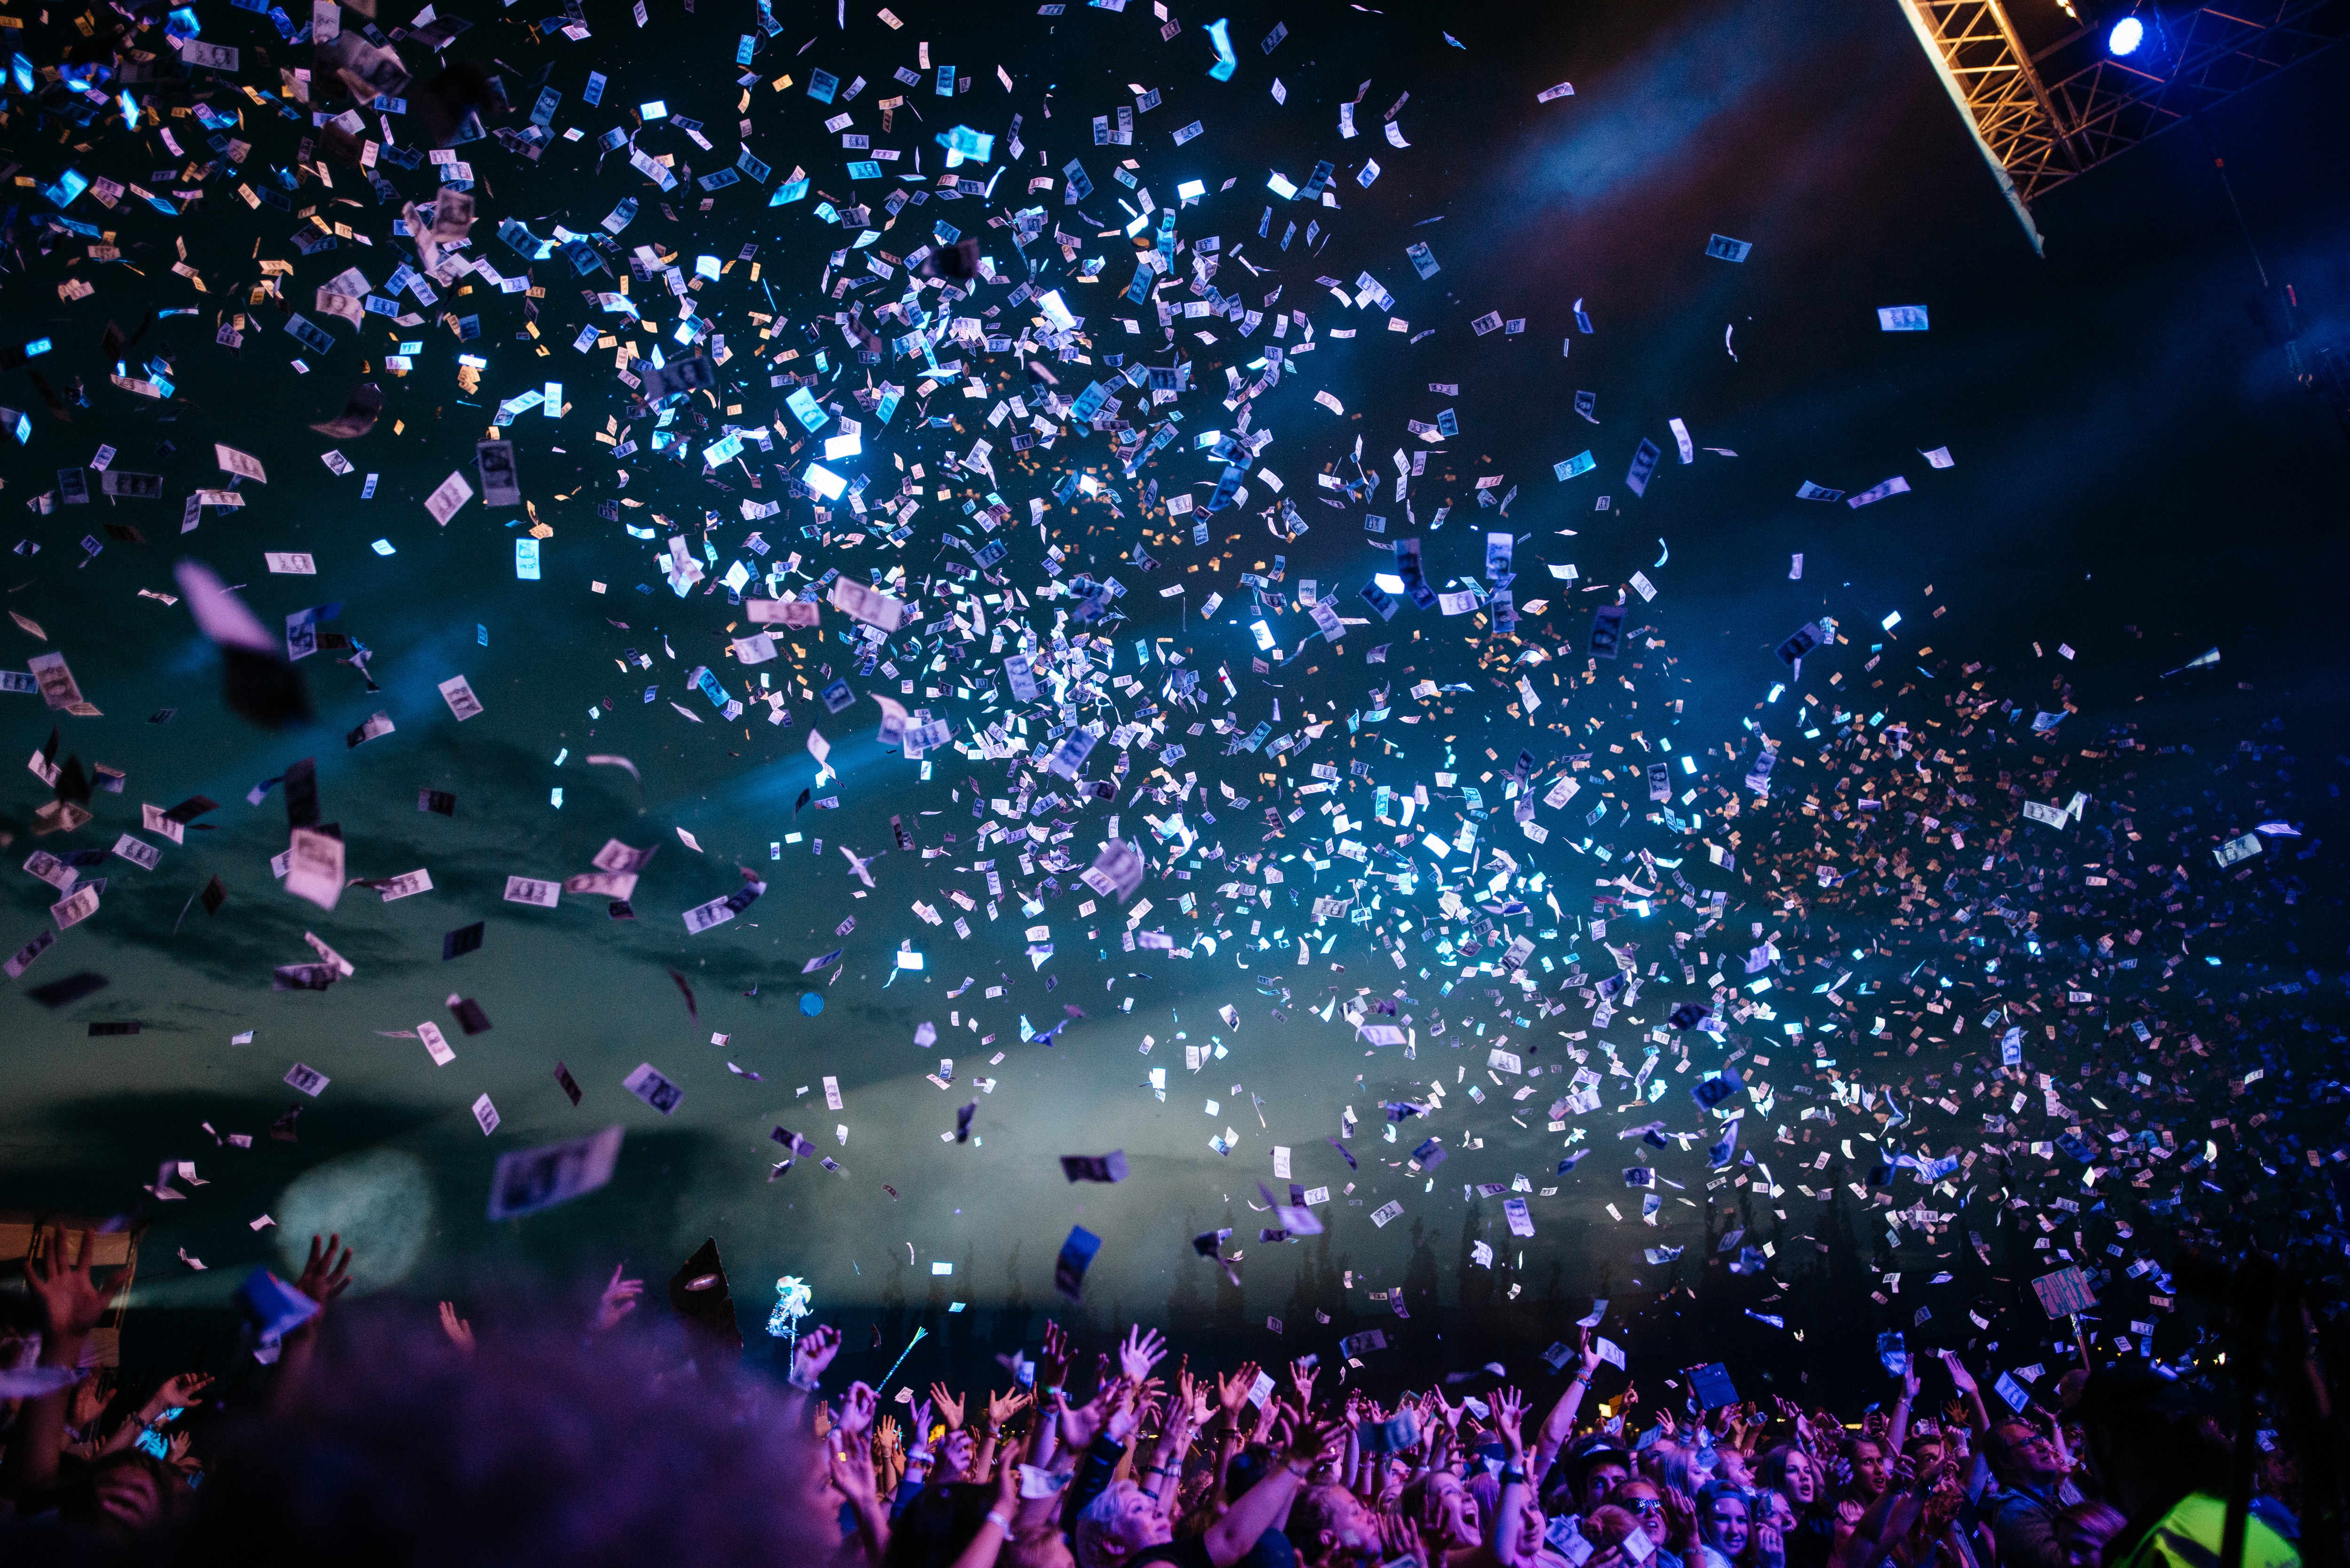 download latest wallpapers for mobile,entertainment,crowd,performance,purple,confetti